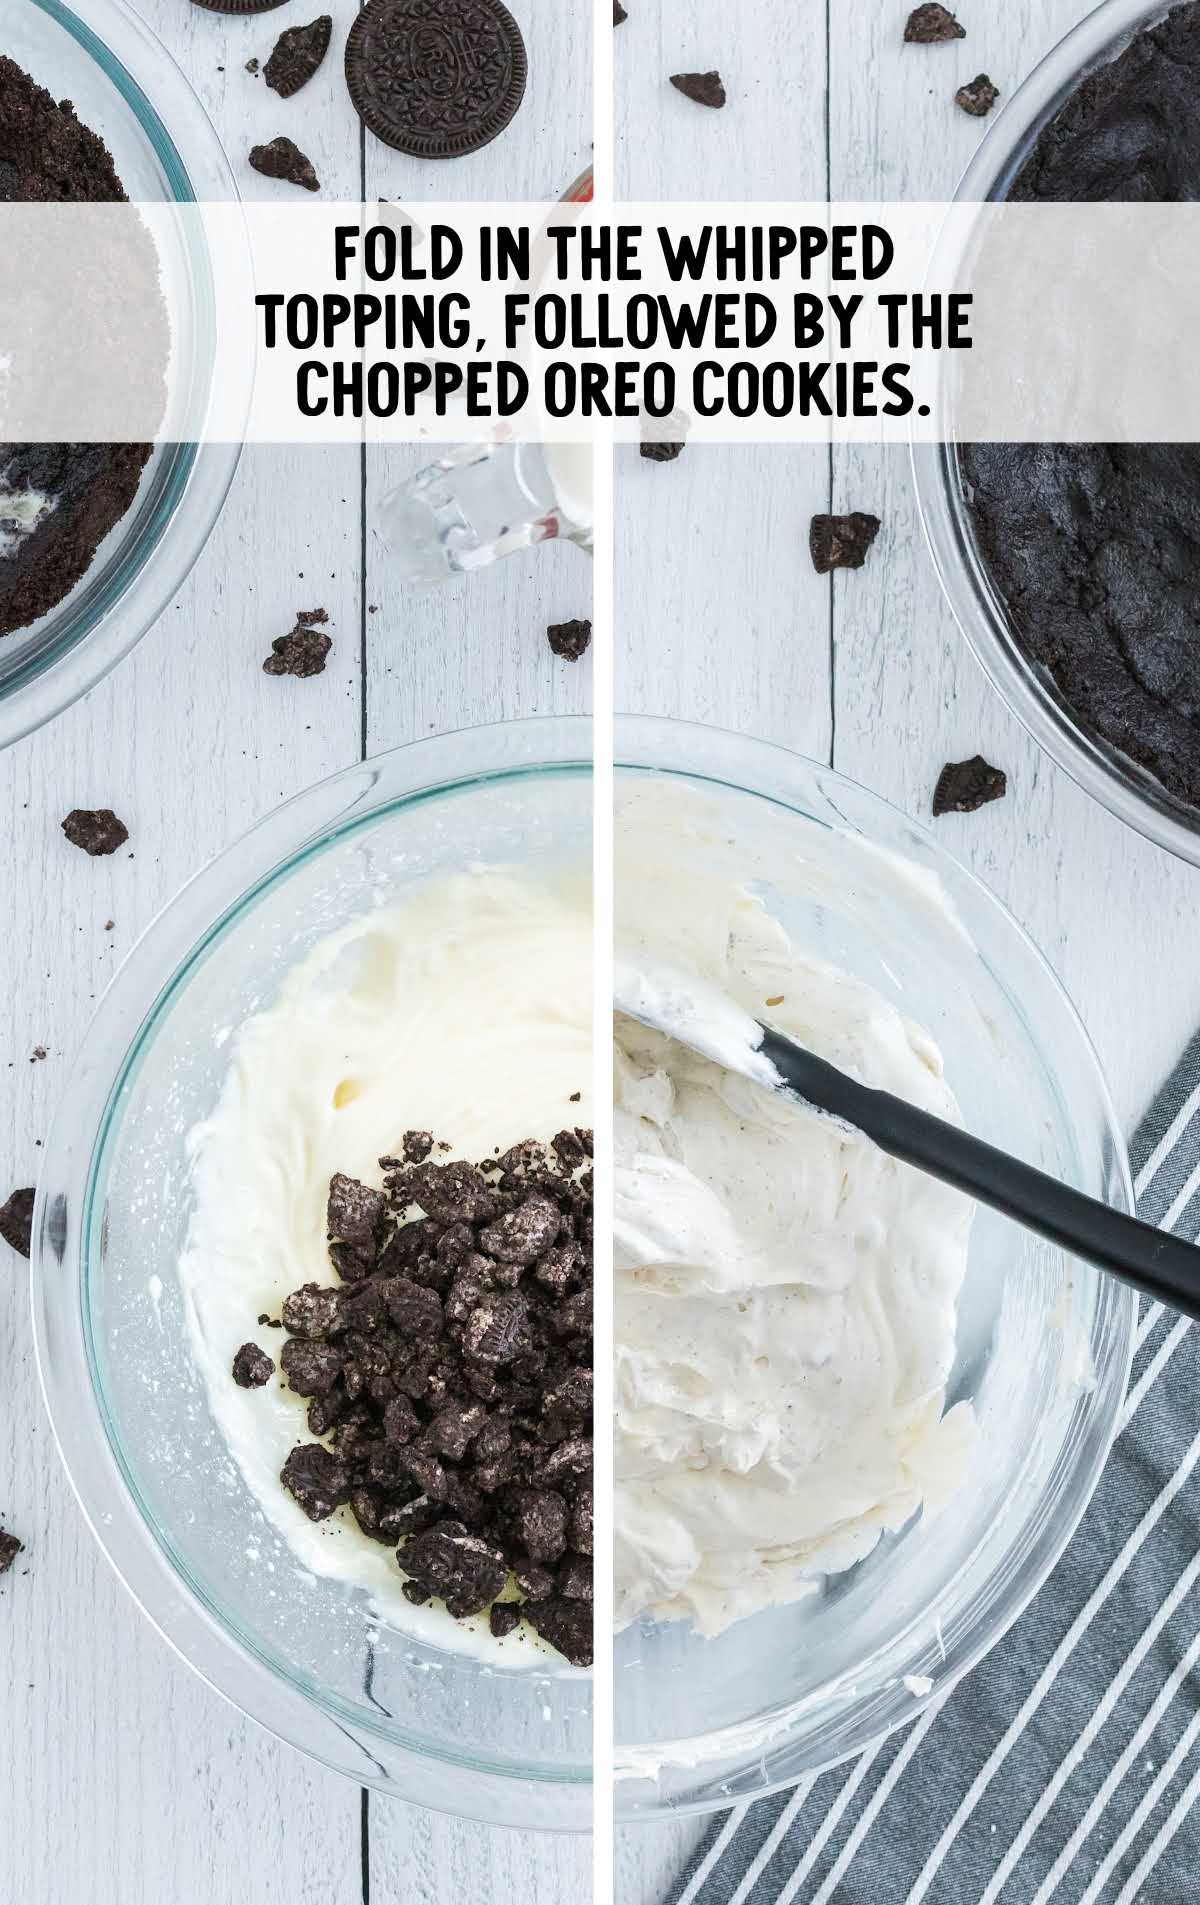 whipped topping and chopped oreo cookies folded in a bowl